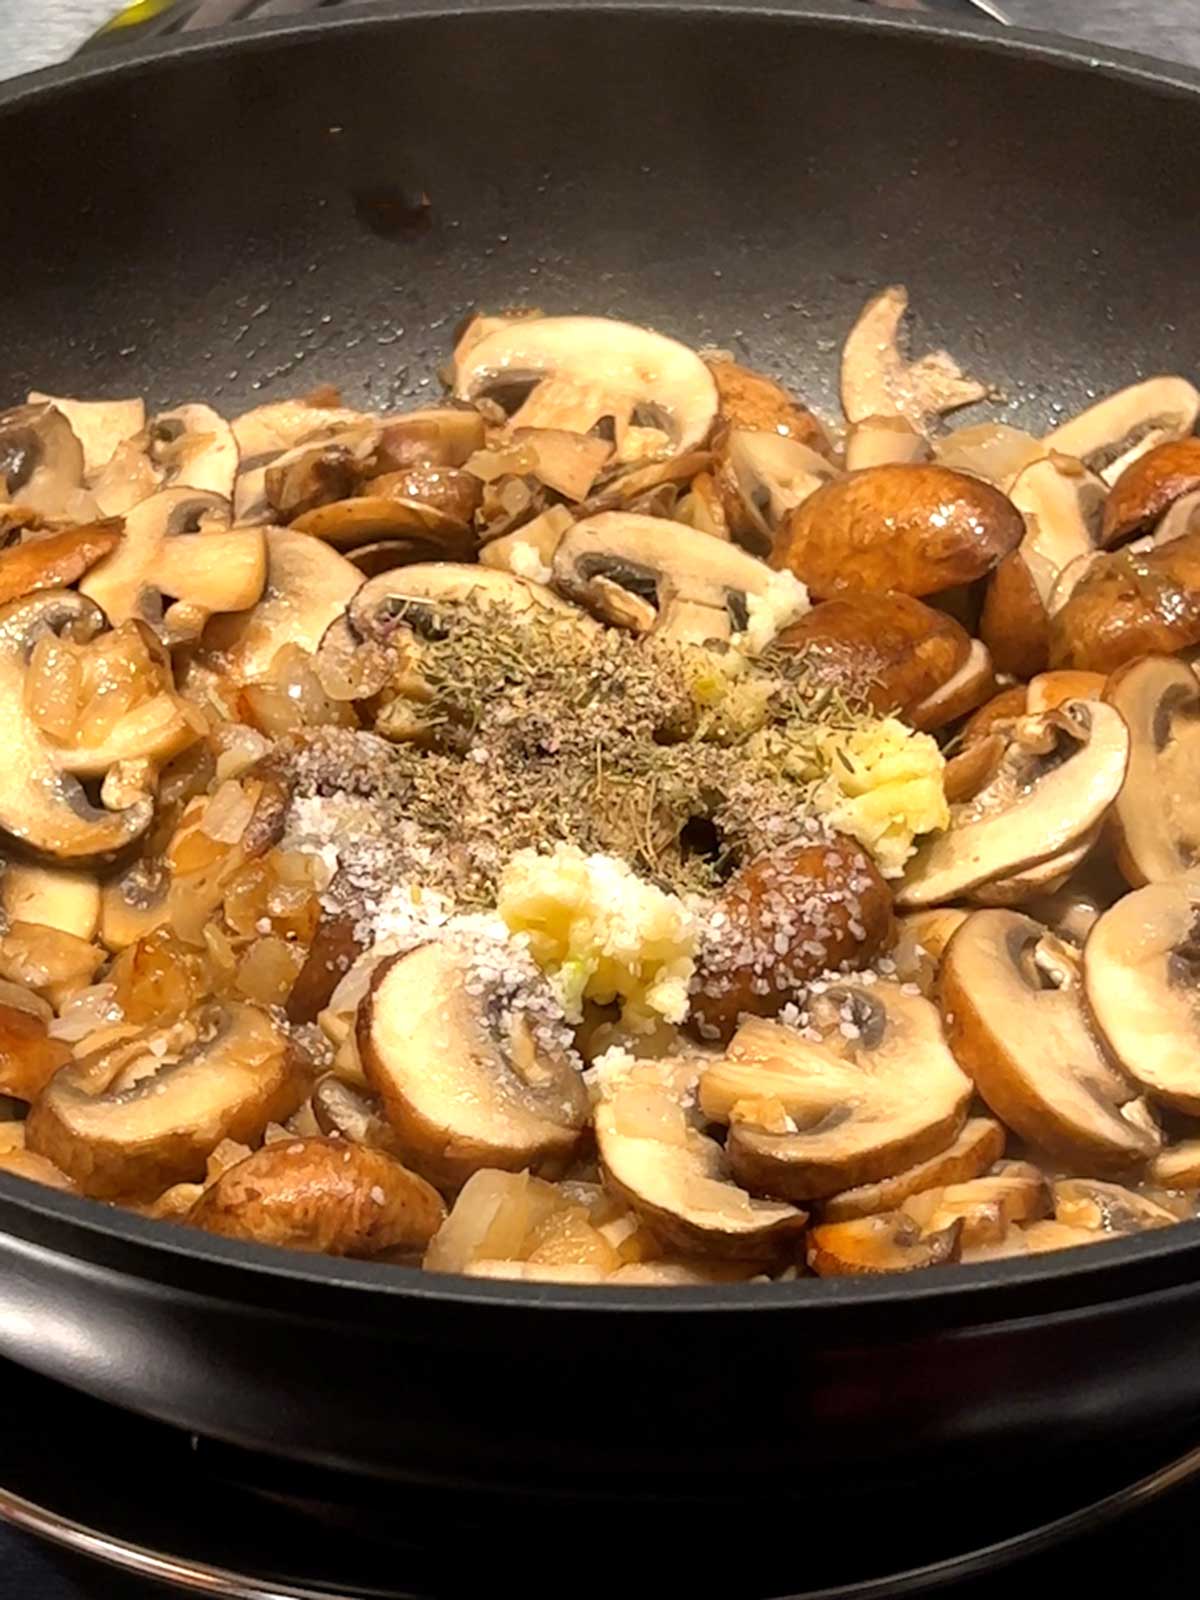 Garlic, salt, thyme and pepper added to cooked onions and mushrooms.